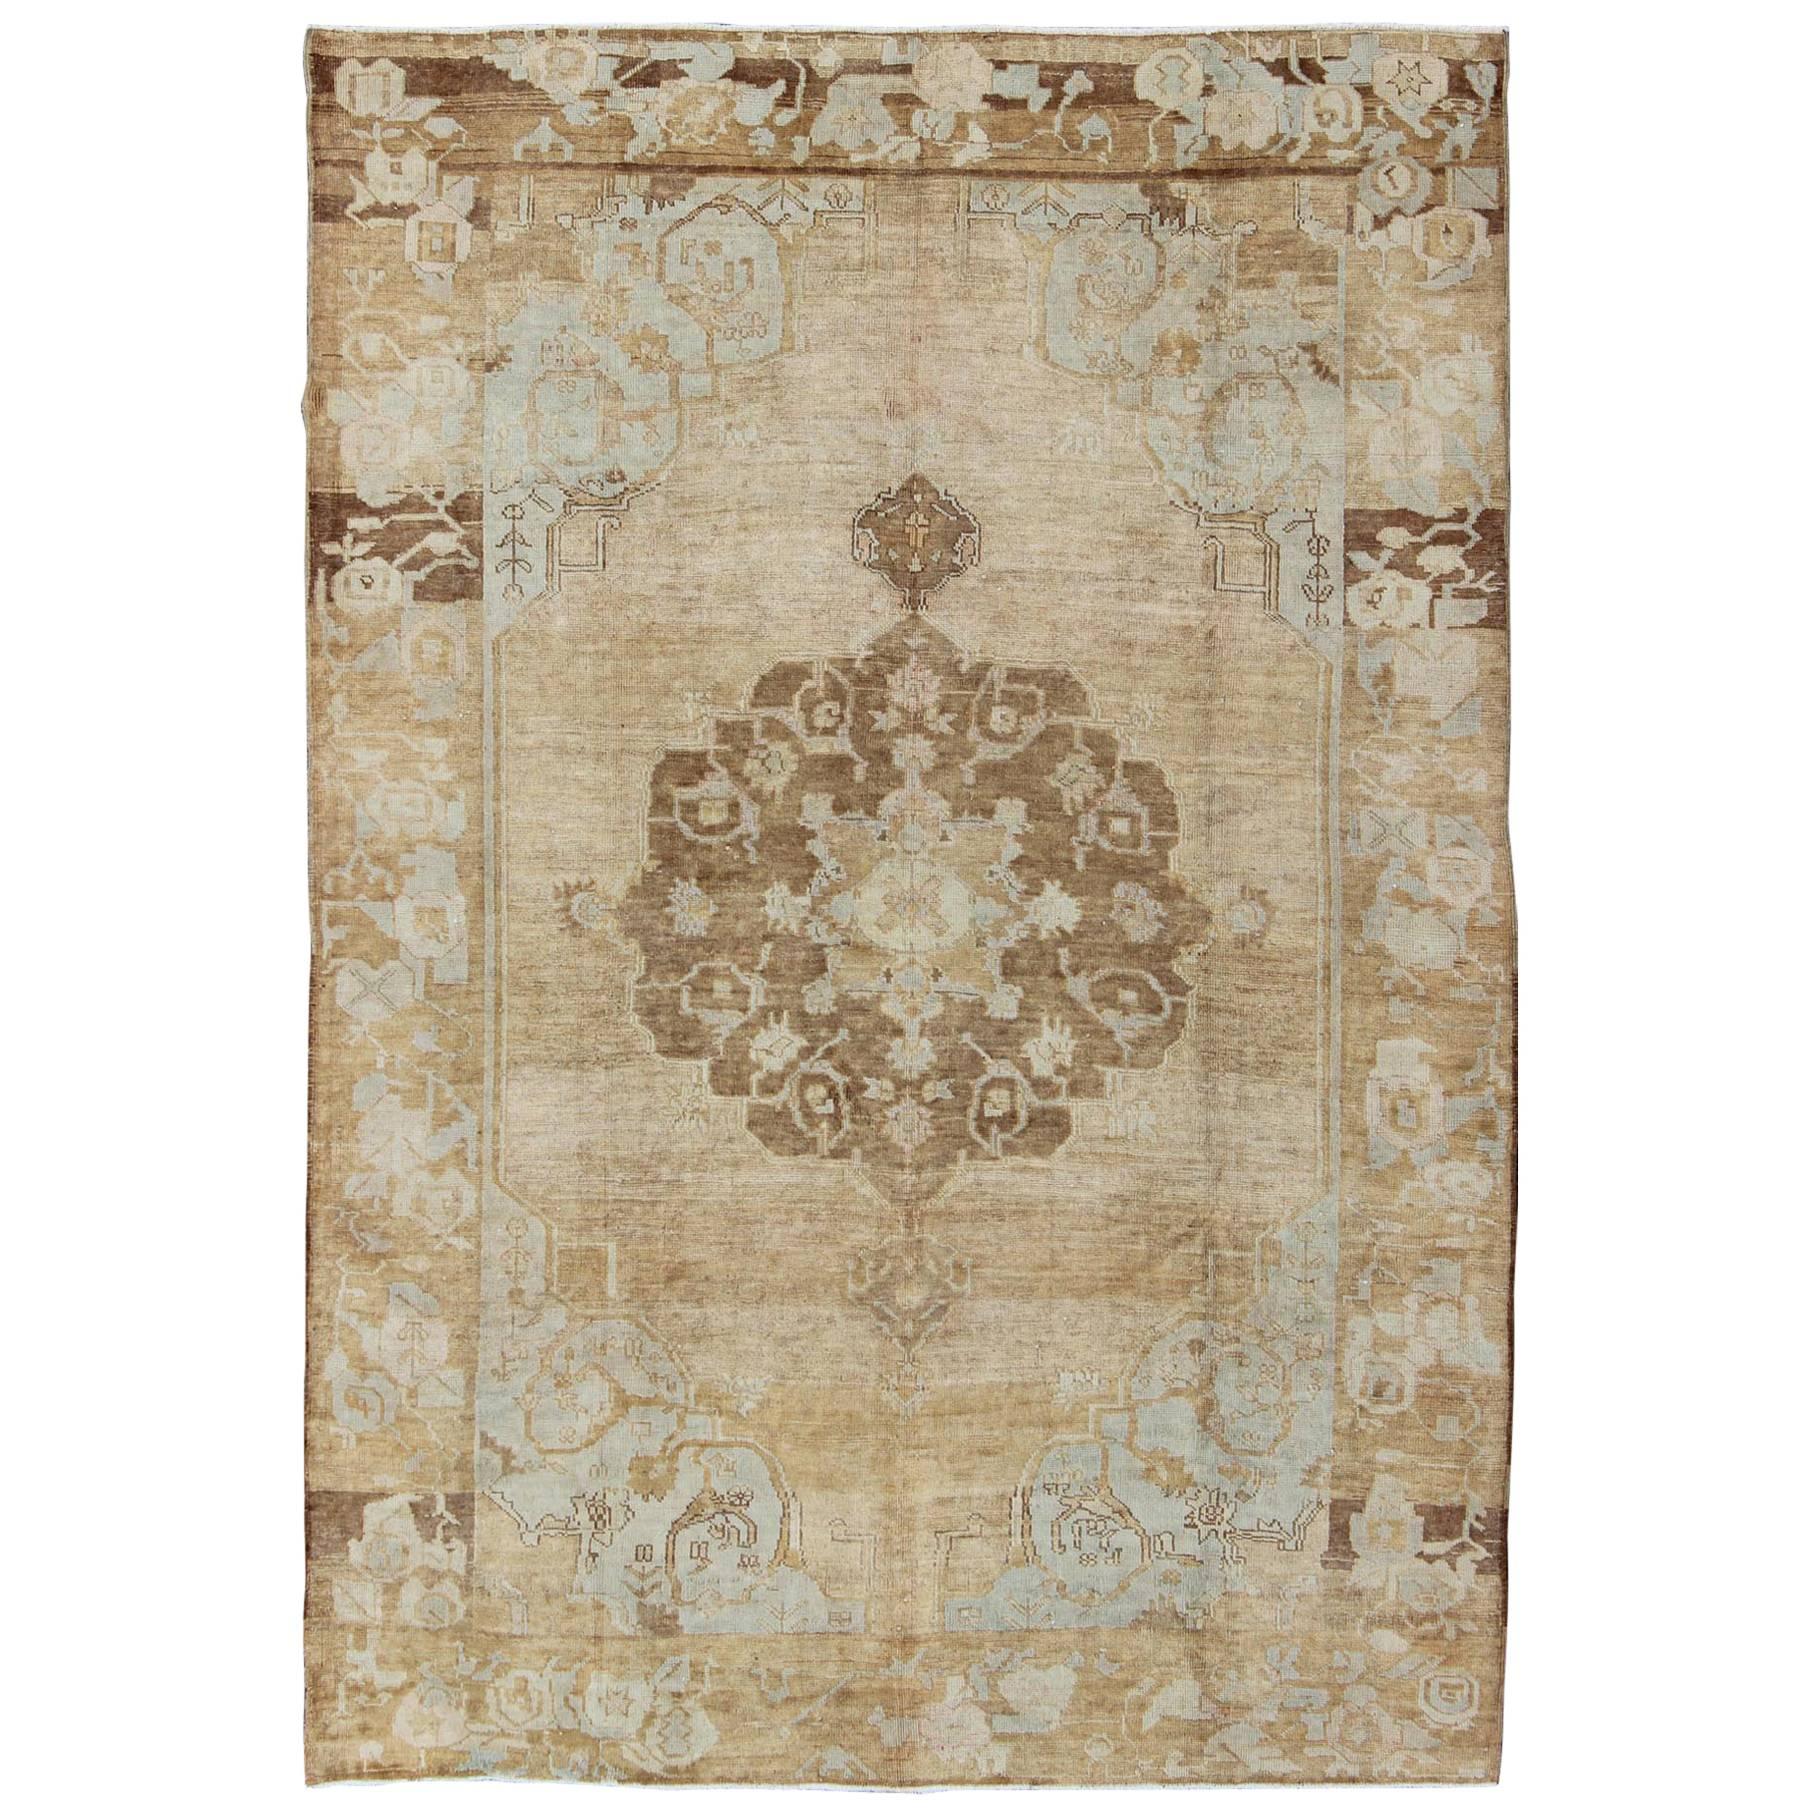 Vintage Turkish Kars Rug with Floral Medallion in Camel, Tan, Taupe and Gray